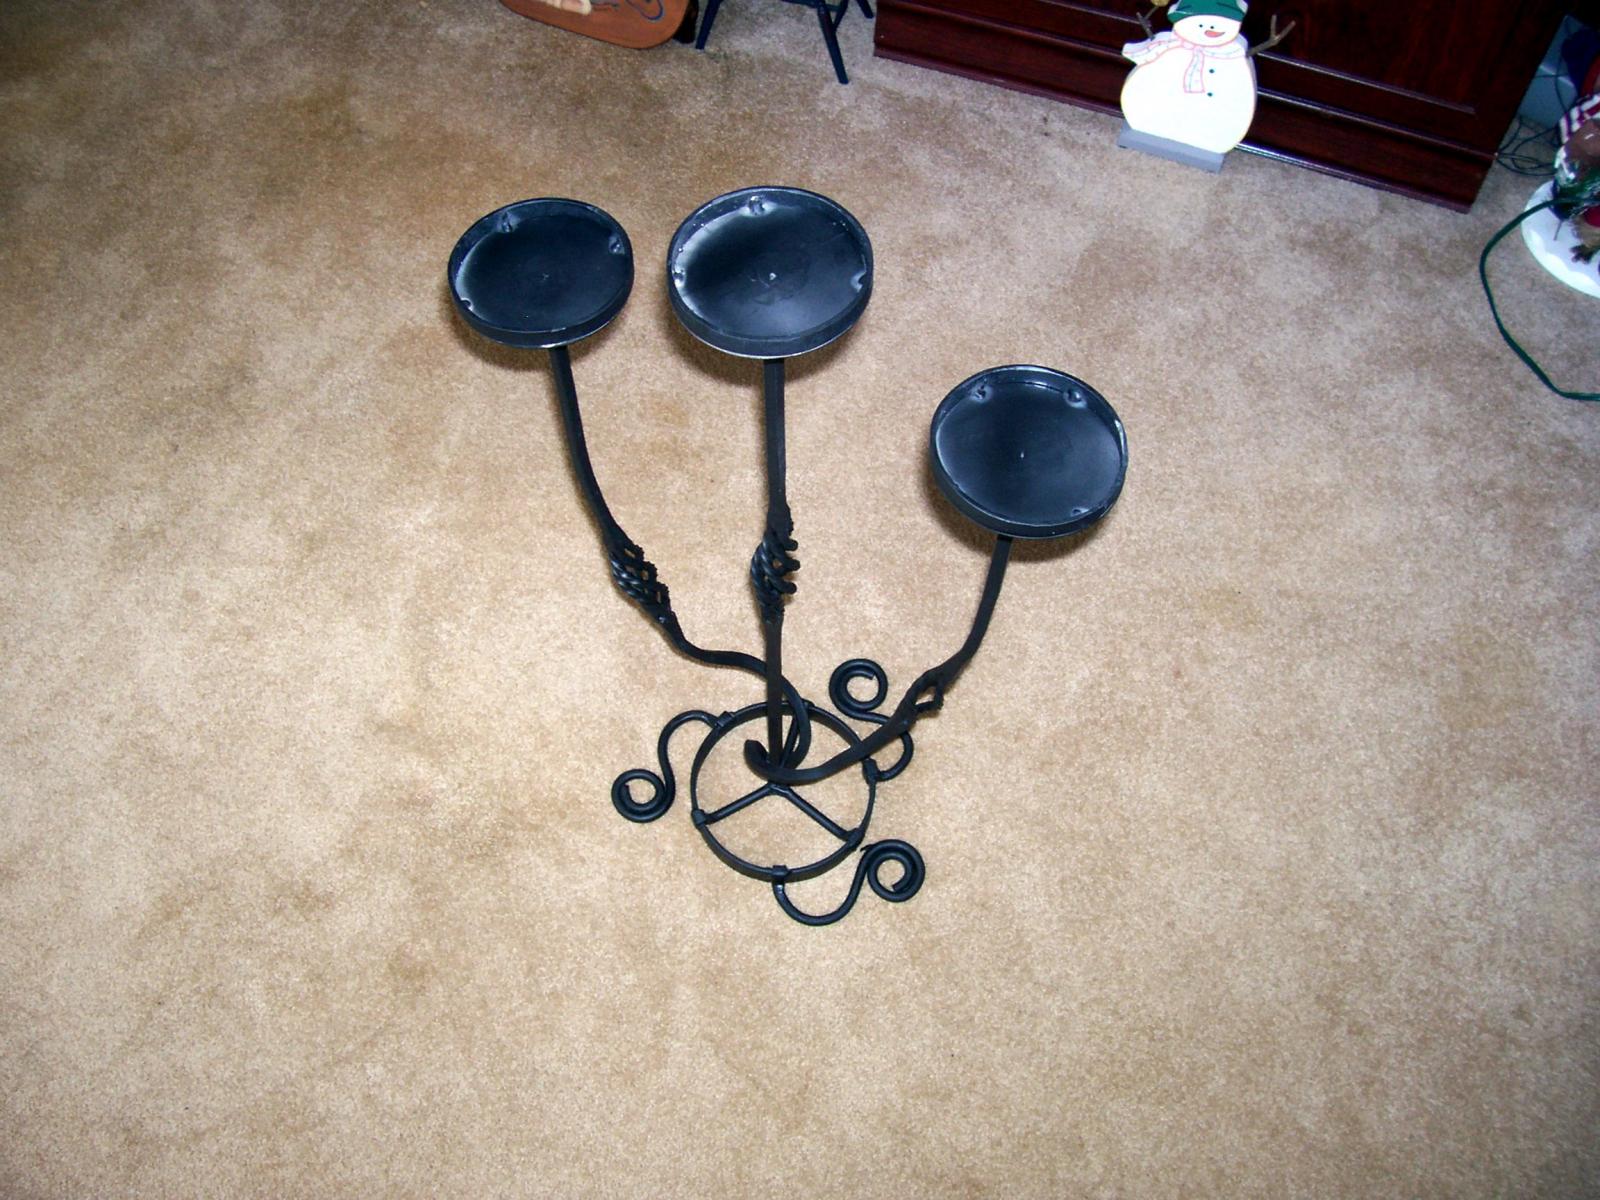 Floor candle/plant stand